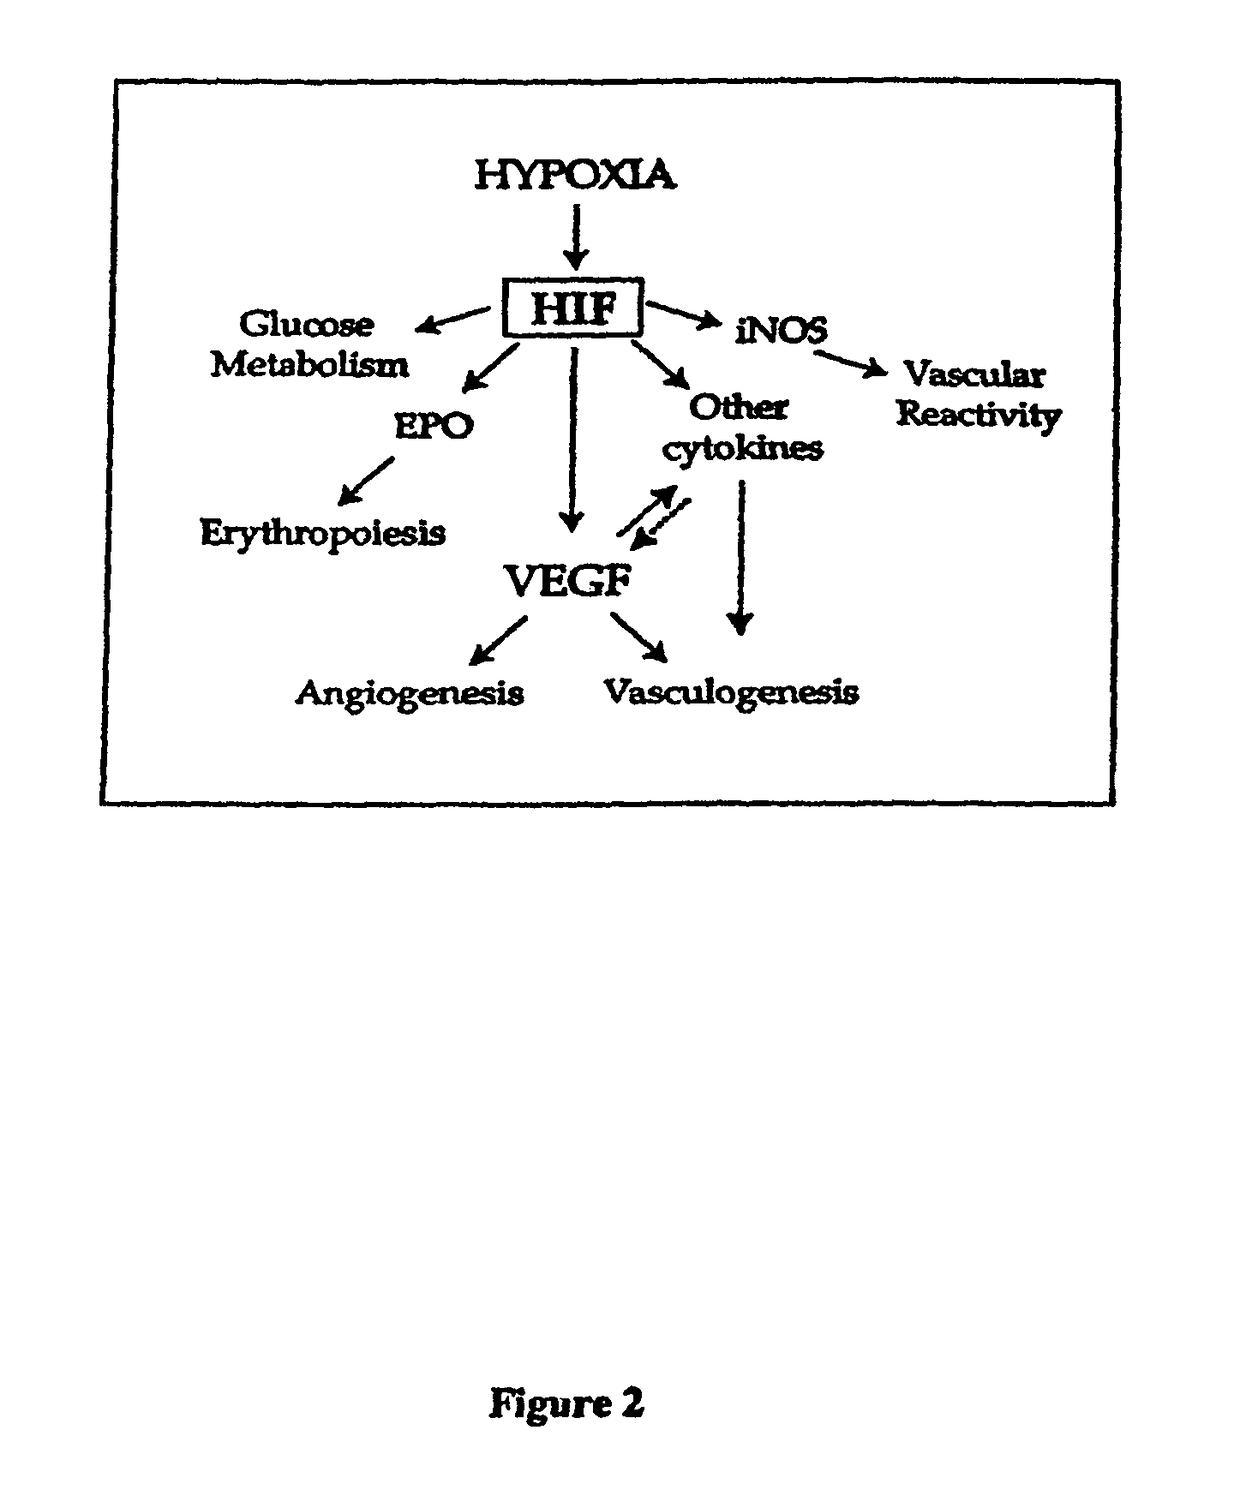 Method of treating or preventing pathologic effects of acute increases in hyperglycemia and/or acute increases of free fatty acid flux